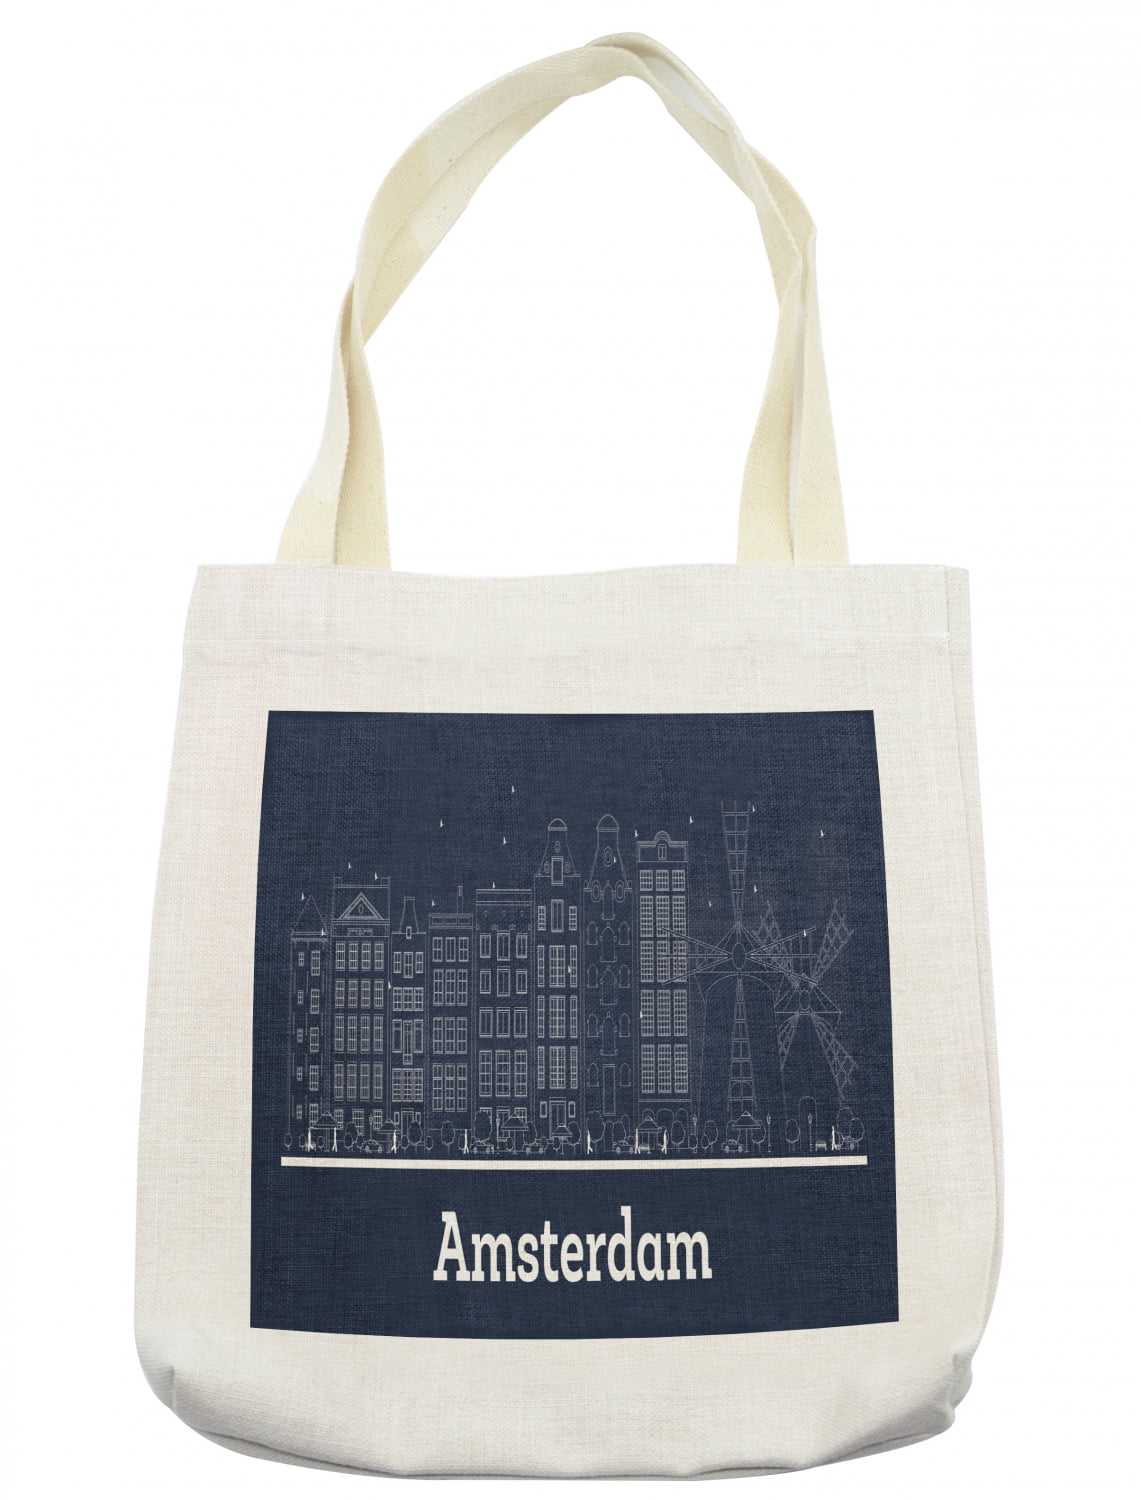 Amsterdam Bag, Monochrome Design of the City Outline Drawing Modern Architecture, Cloth Linen Reusable Bag for Shopping Books Beach More, 16.5" X 14", Cream, by Ambesonne - Walmart.com